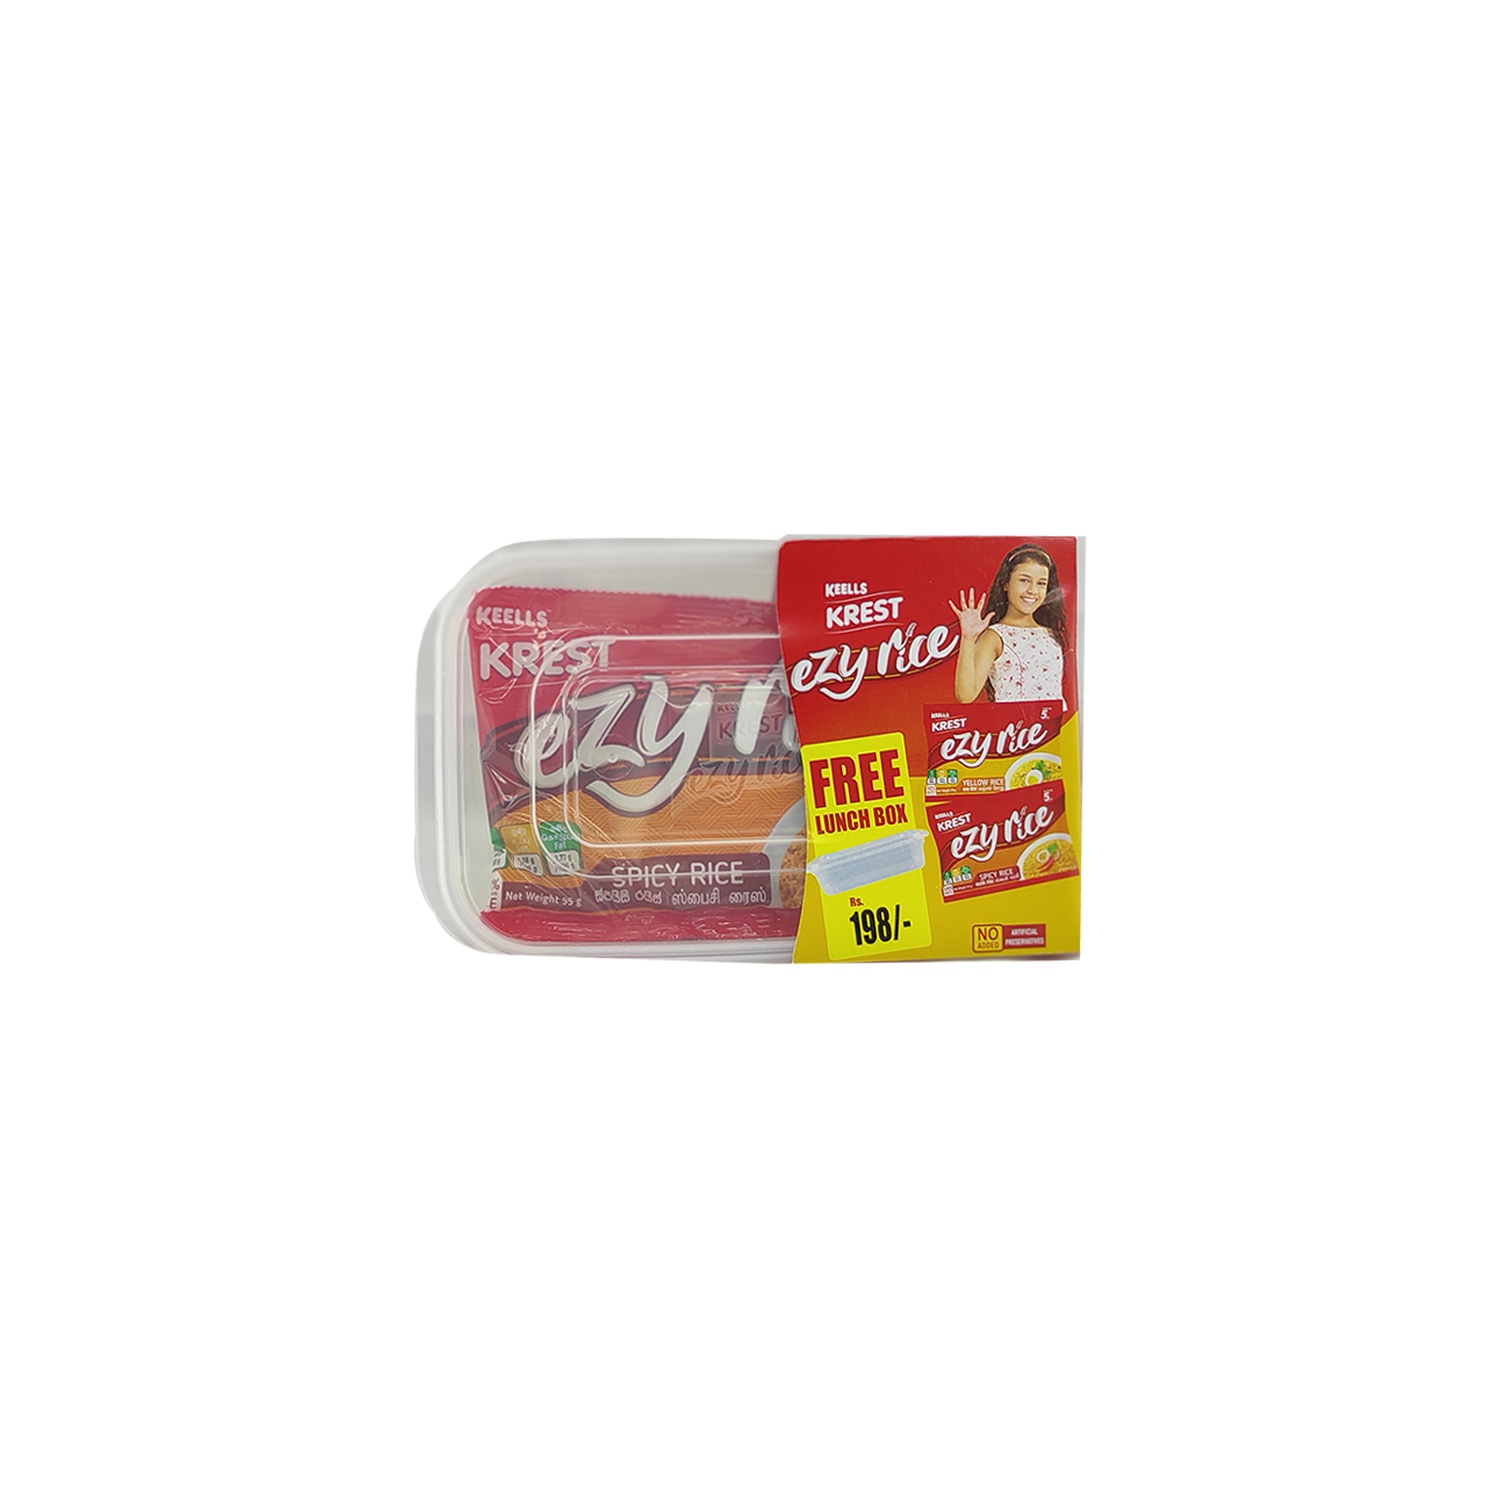 Keells Krest Ezy Rice Combo Offer Free Lunch Box With Yellow Rice & Spicy Rice 280G - KEELLS/KREST - Noodles - in Sri Lanka